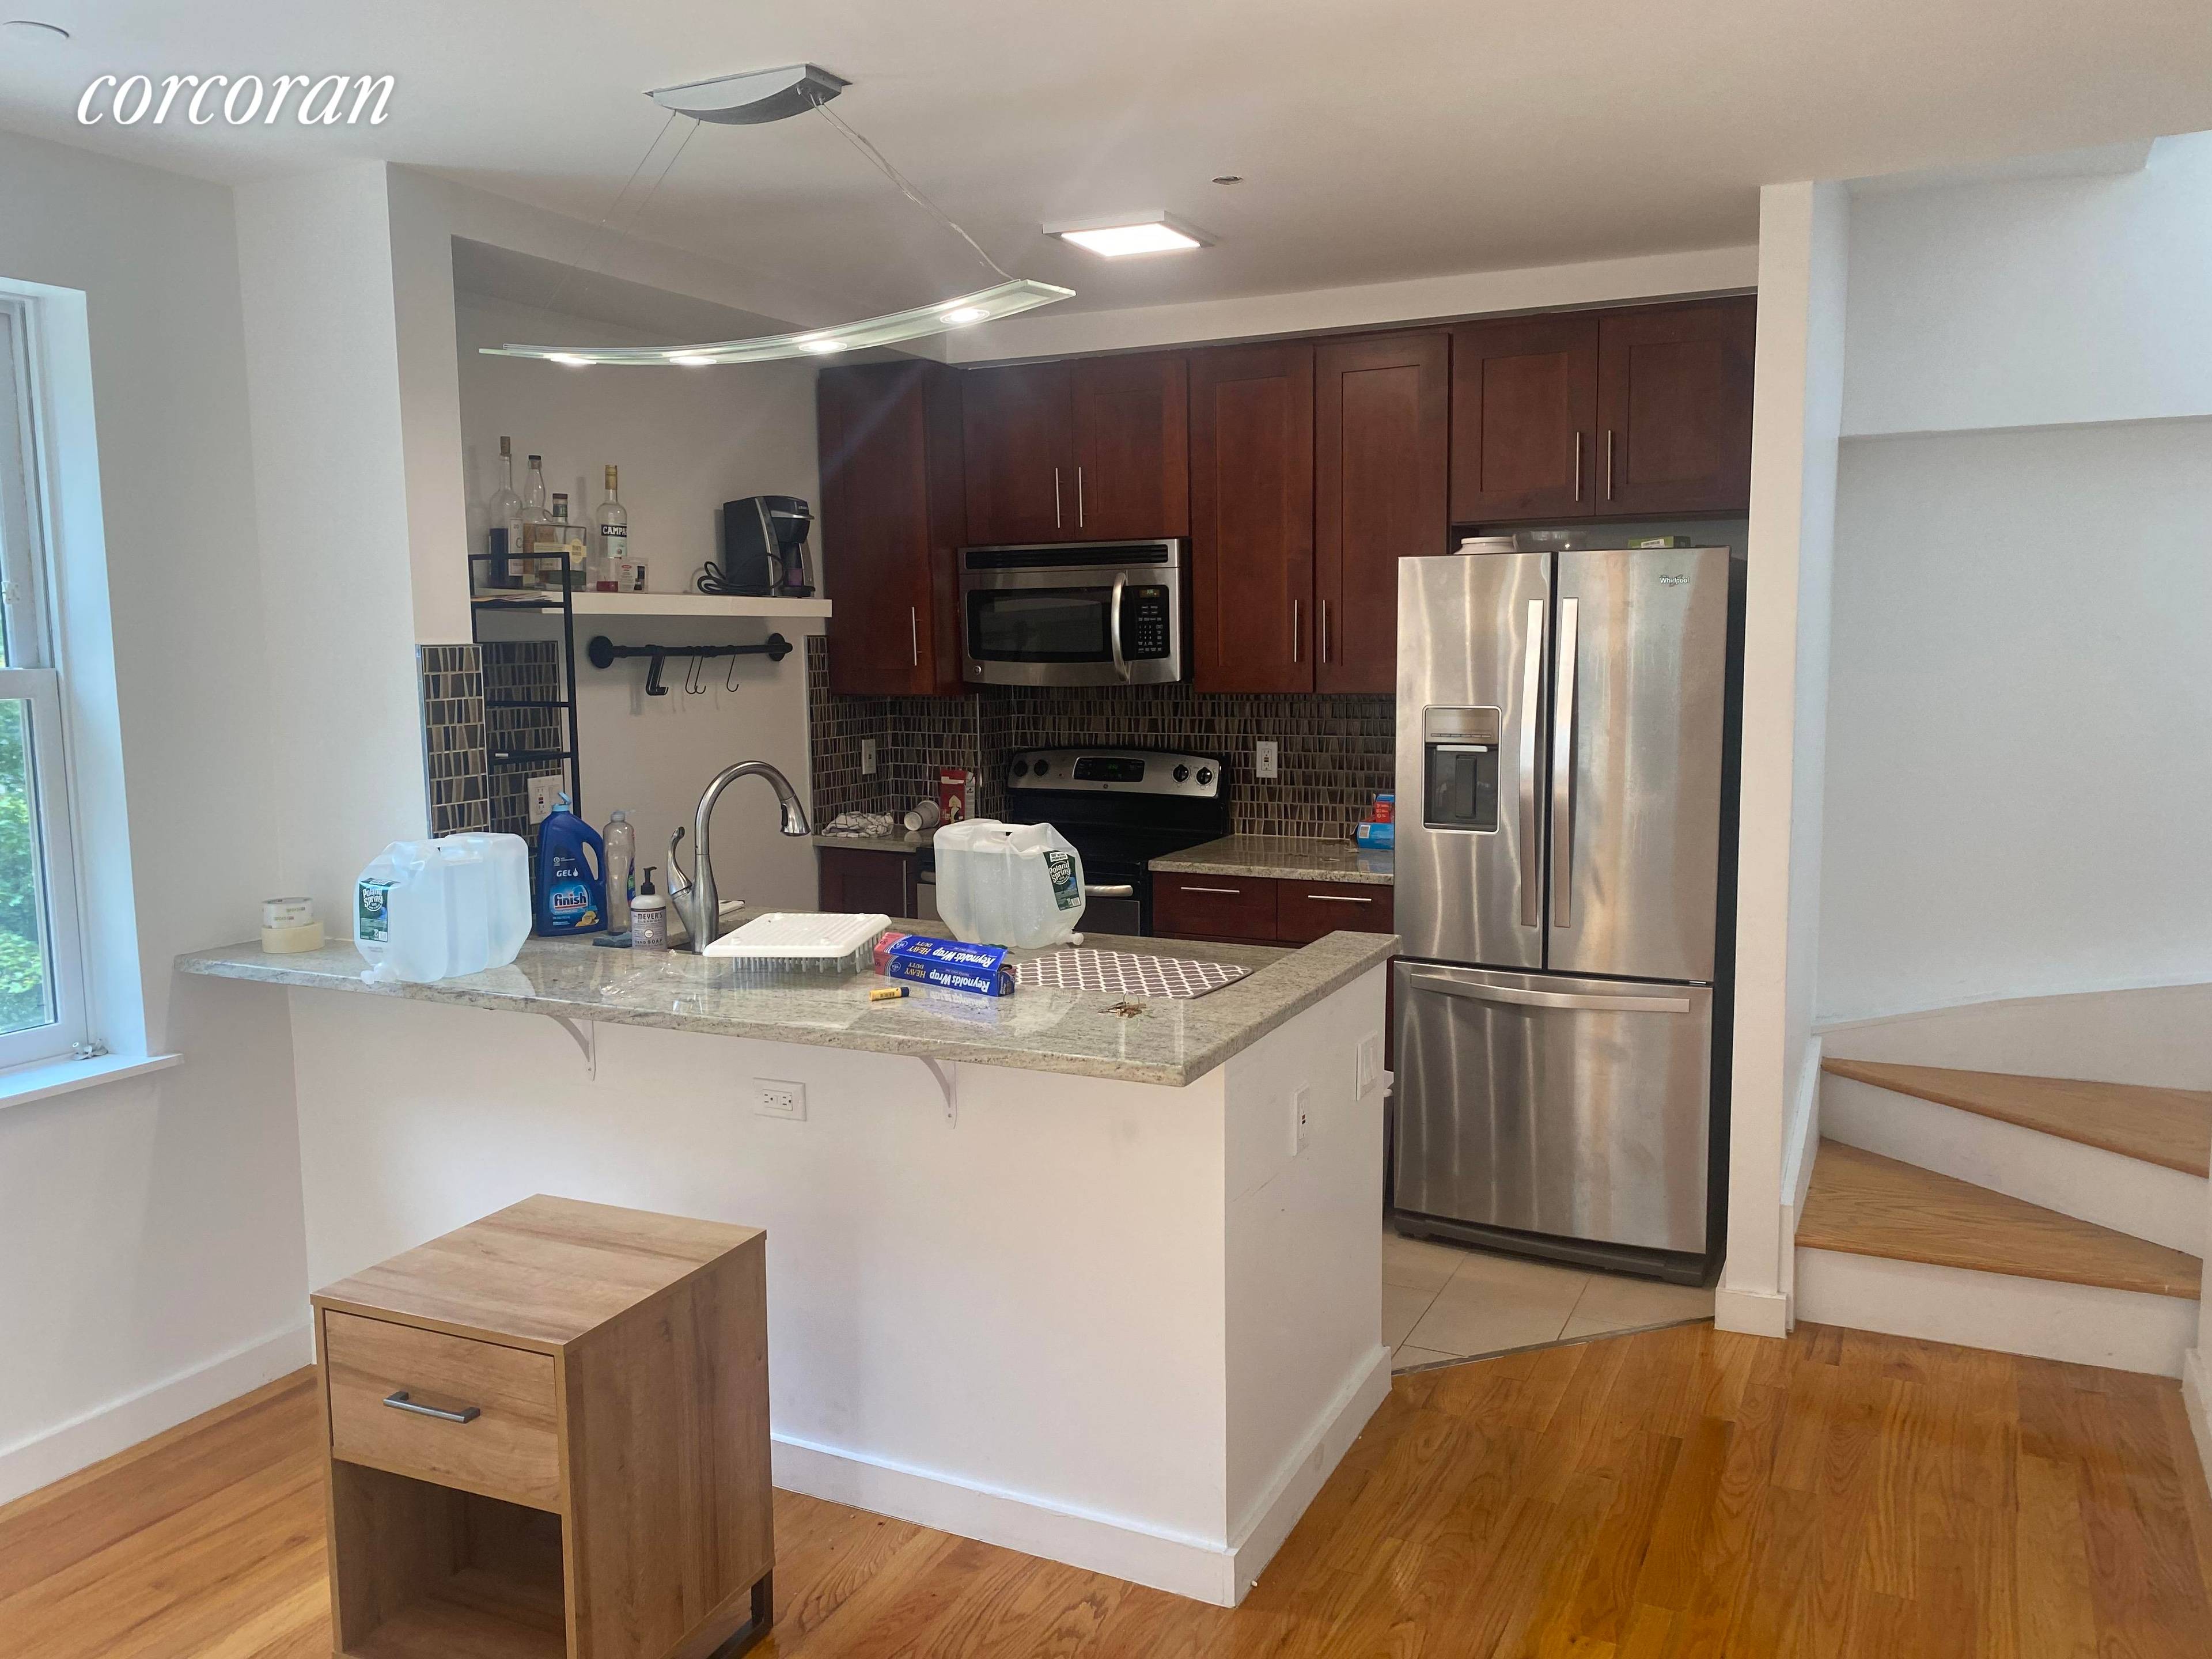 Gorgeous 3 bedroom, 2 full bath duplex in the heart of Clinton Hill.